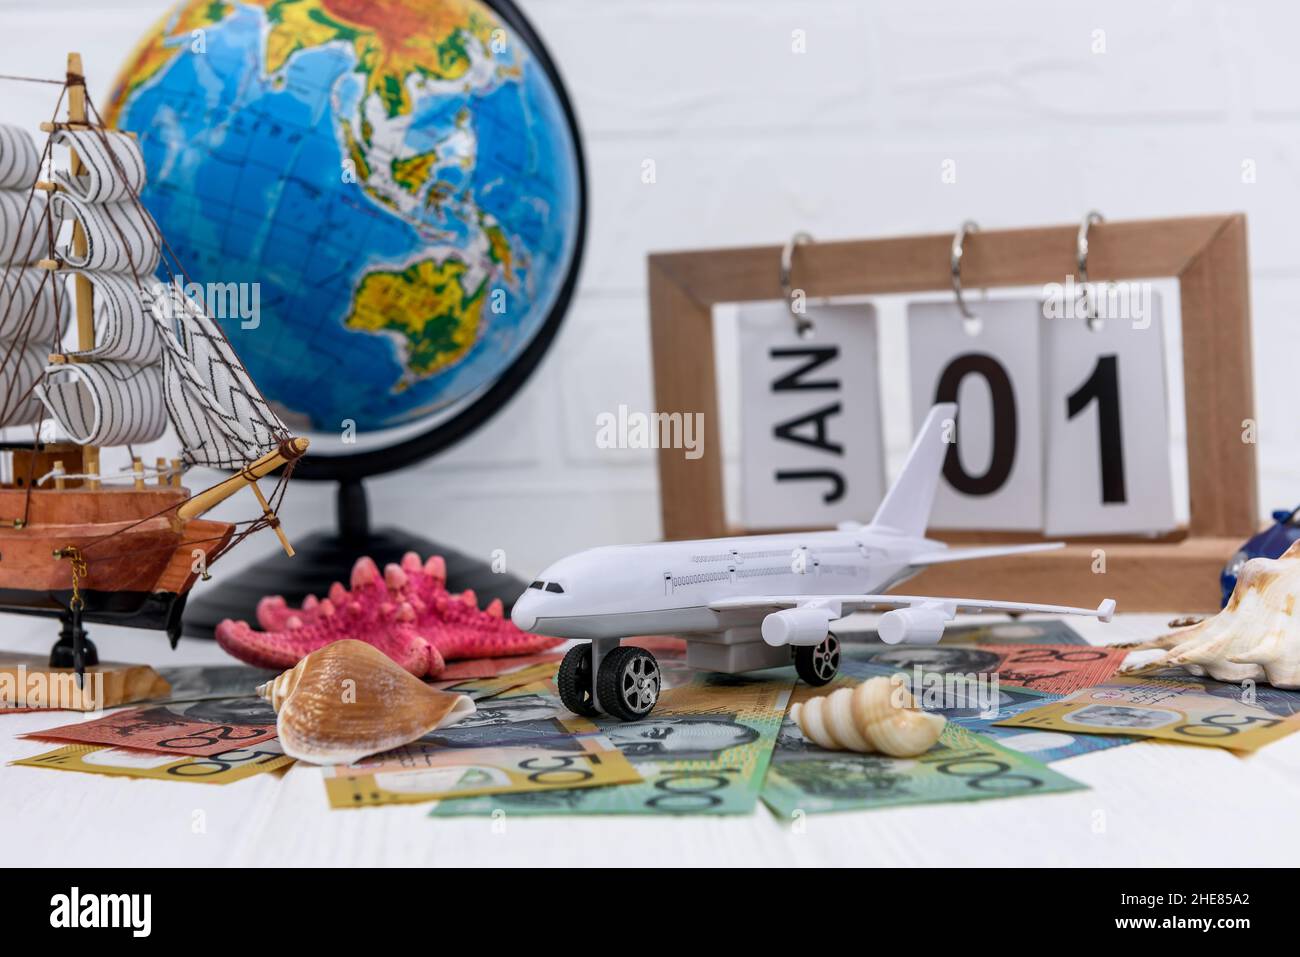 Toy airplane with globe and australian dollar banknotes Stock Photo